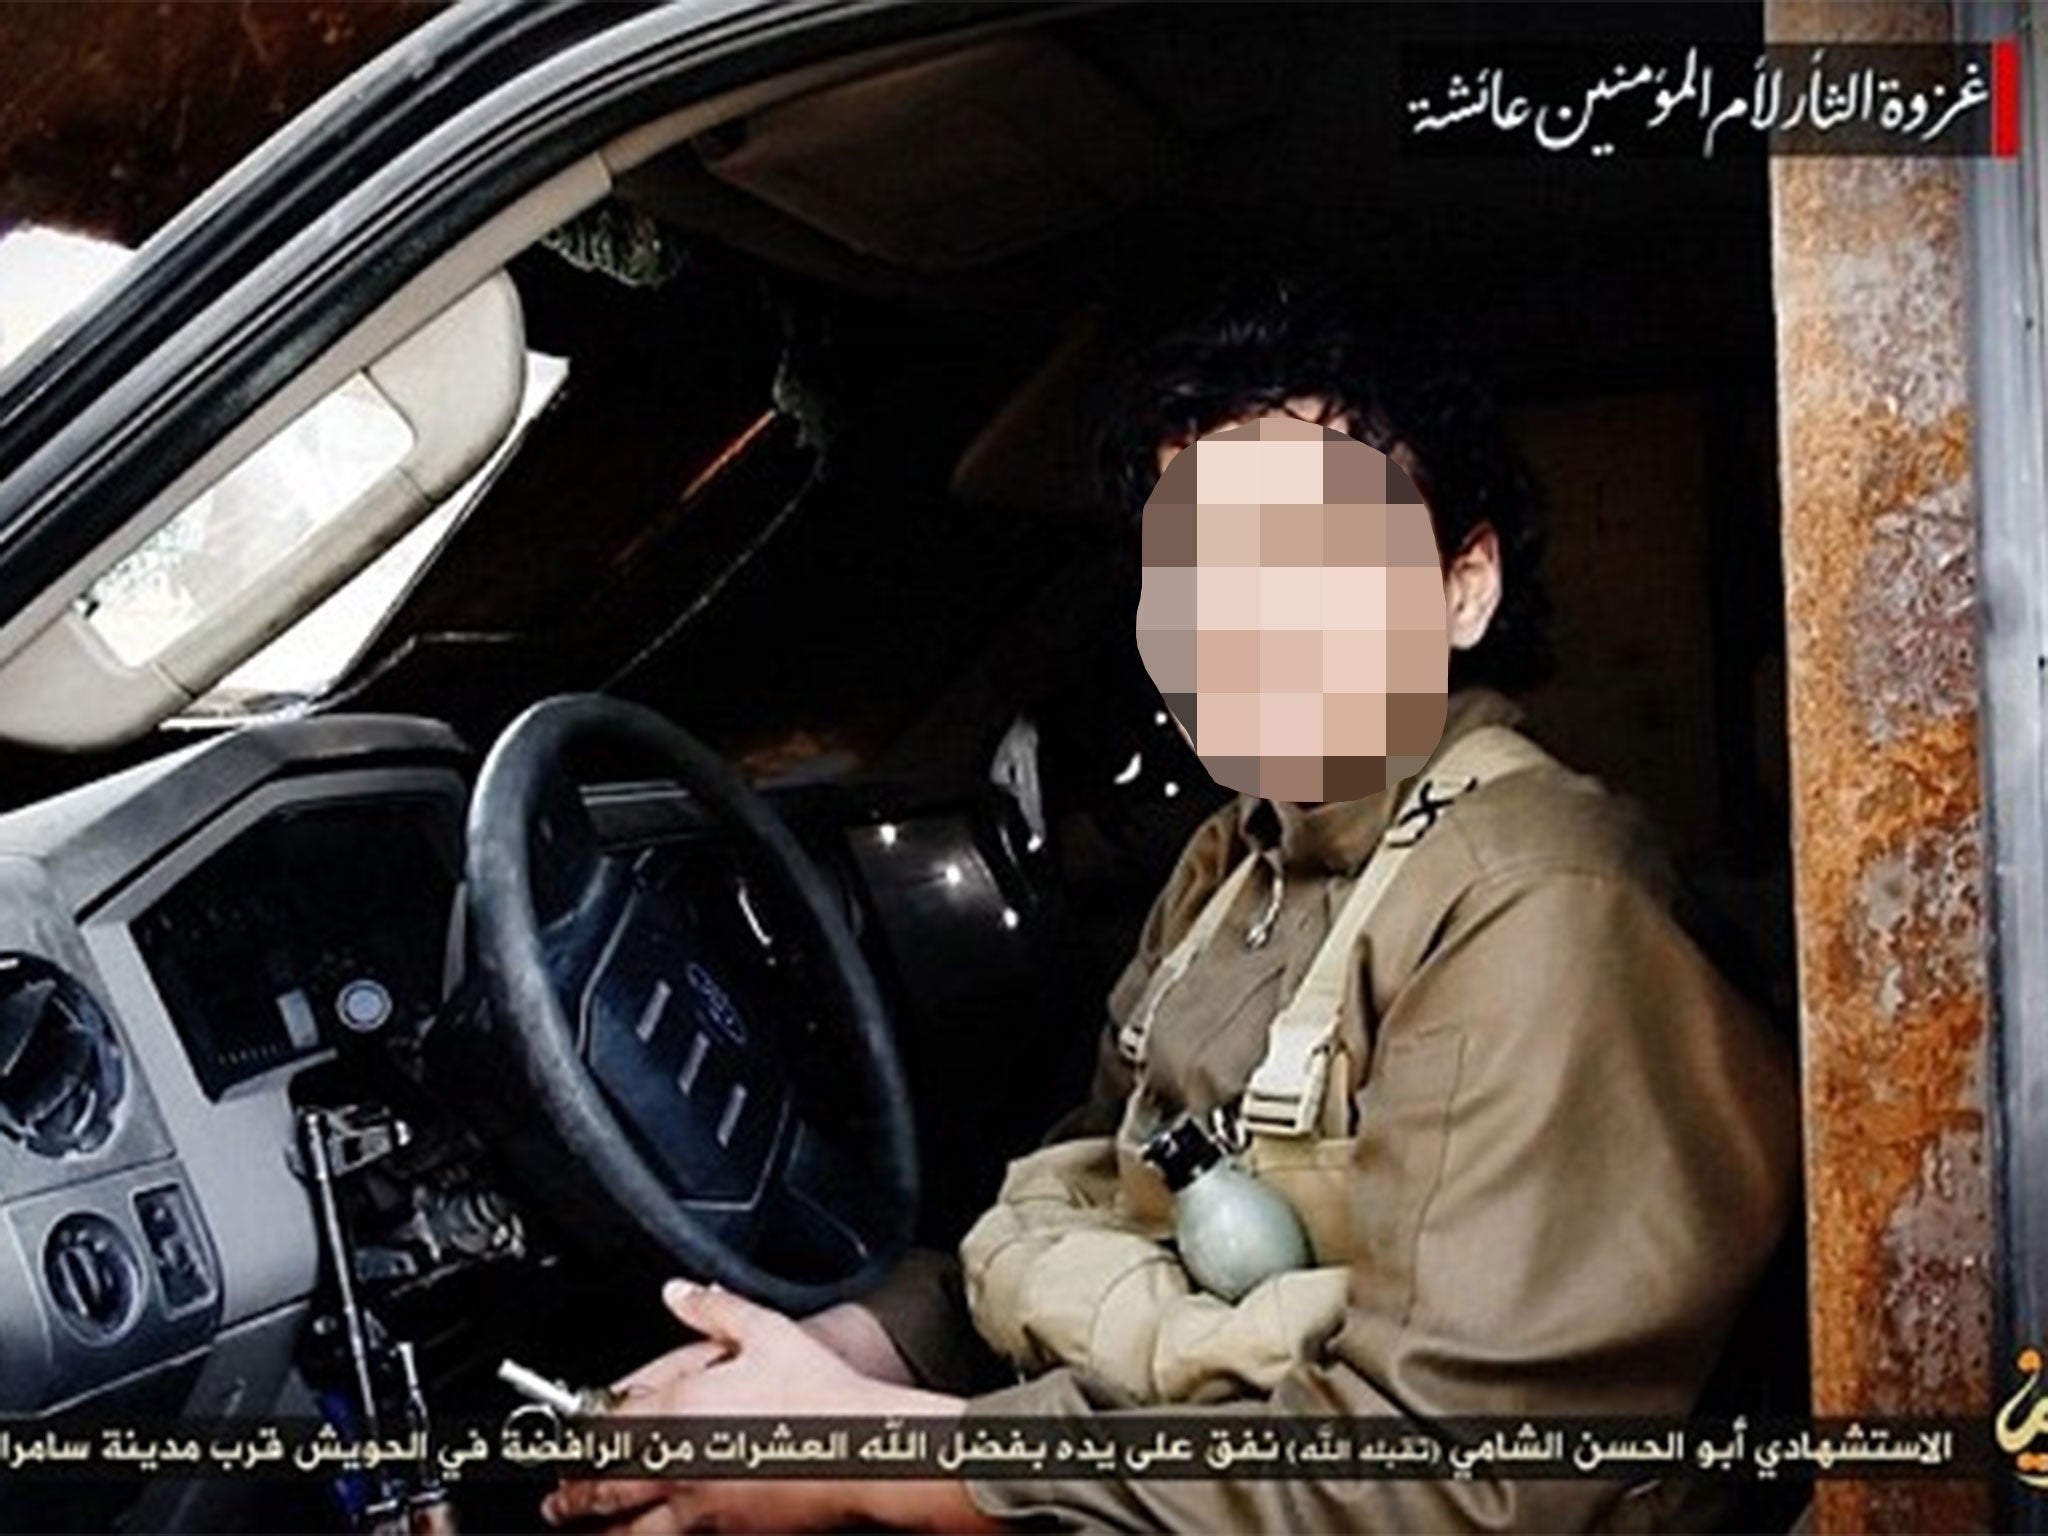 An Isis video showed a young boy who it claimed took part in a suicide bombing